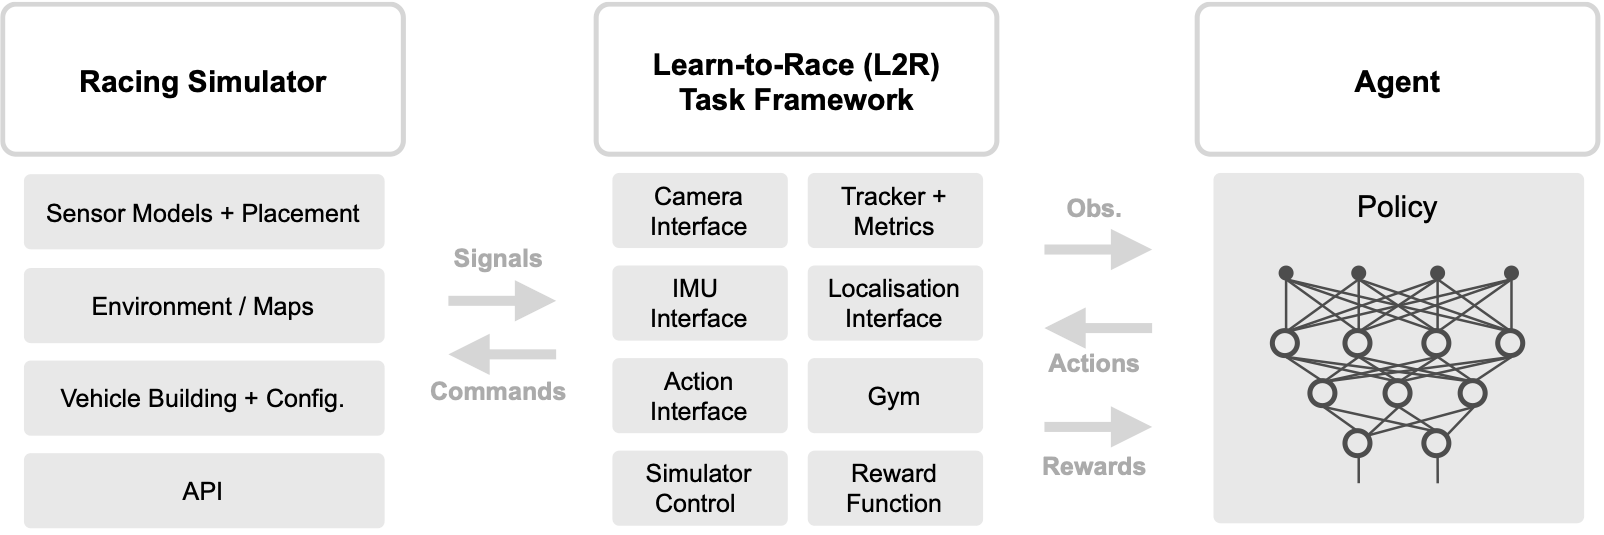 Learn-to-Race: A Multimodal Control Environment for Autonomous Racing